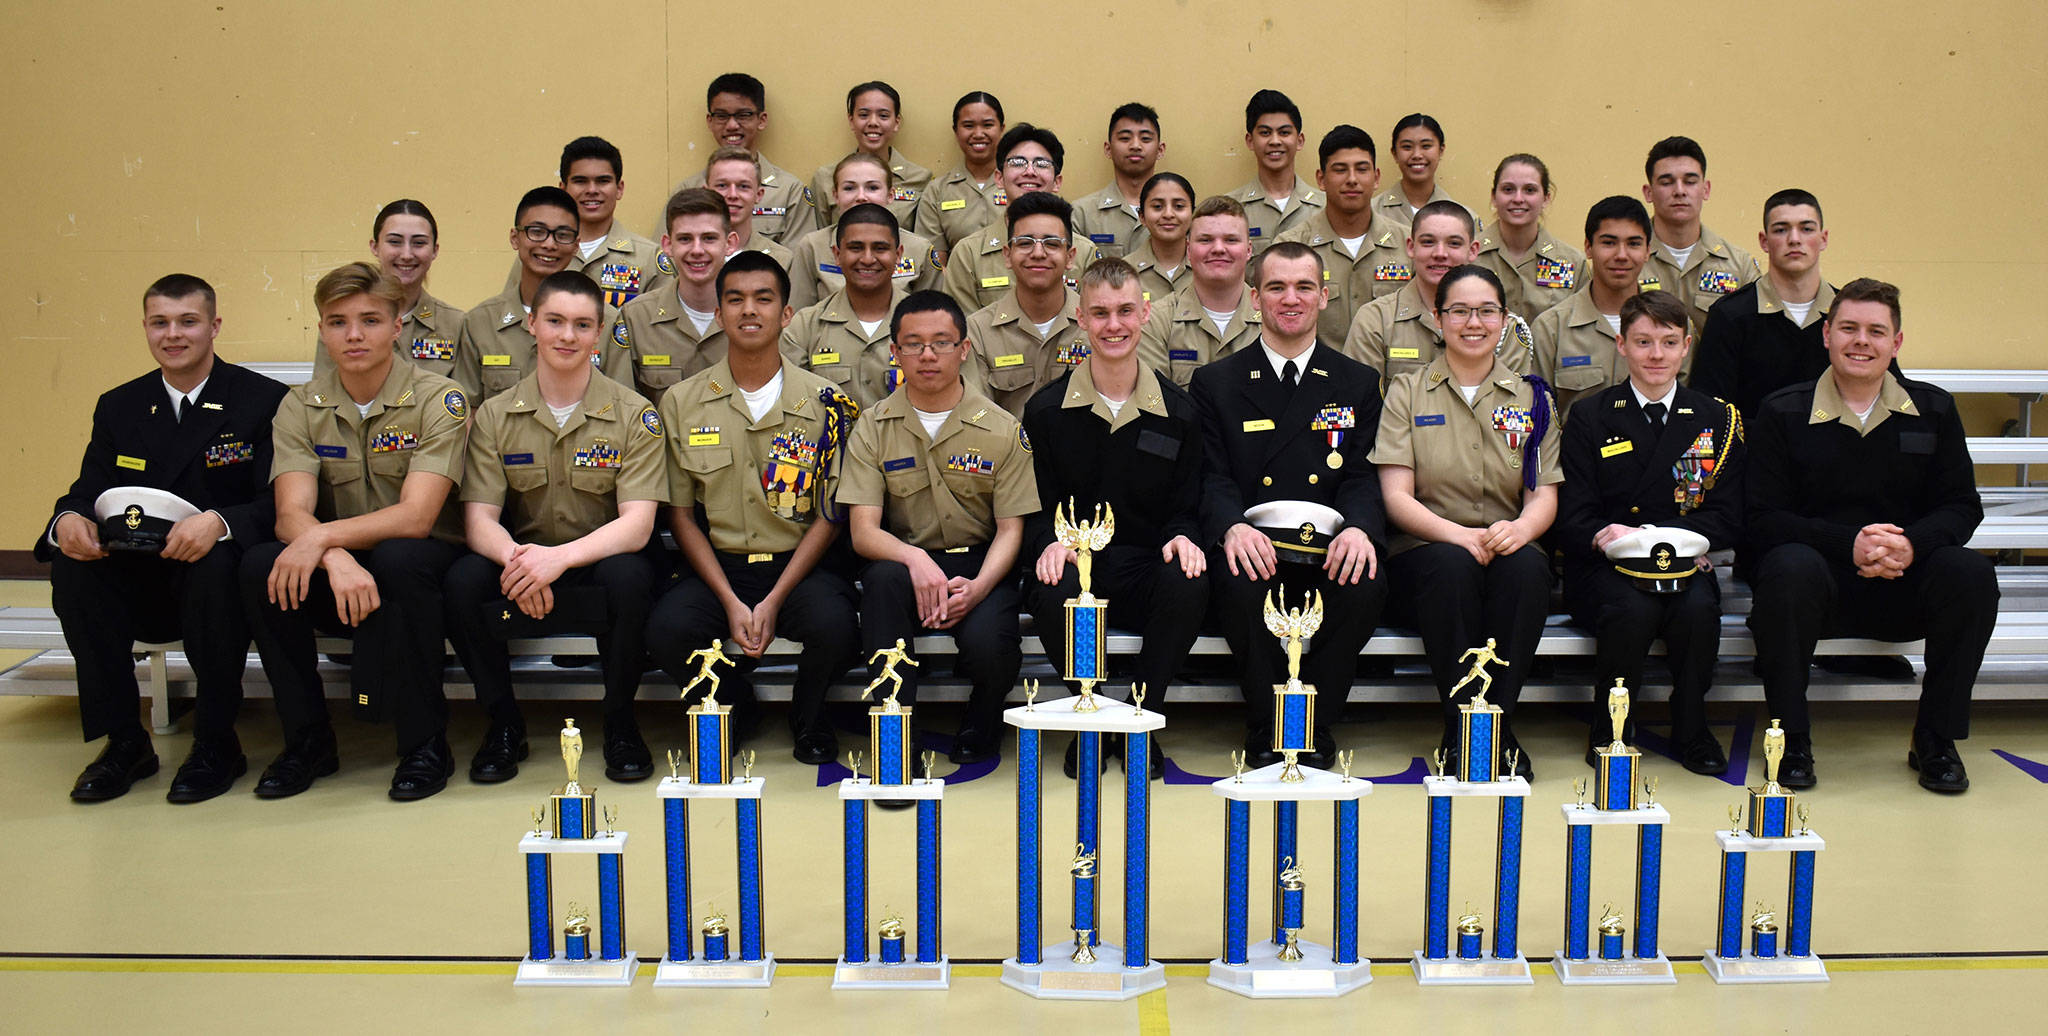 Wildcat Battalion shows off its hardware from the regional Navy competition.First row, left to right: Michael Ramsauer, Ethan Wilson, Christopher Brooks, Jhaylan Munger, John Paul Abides, Ryan Vasileff, Bradley Moon, Natasha Heard, Tristin Macaluso and Dylan Angell.Second row: Emily Gouge, Justin Go, Kevin Schuldt, Manik Bains, Cameron Trujillo, Justin Vasileff, Ethan Macaluso, Brecken Collins and Mac Nuanez. Third row: Kanoa King, Blake Servatius, Autumn Coker, Ryon Clemena, Virginia Martinez, Aaron Martinez, Taylor Kesler and Isaac Gomez. Fourth row: John Francisco, Elaine Aguirre, Aldrin Bonganay, Lawrence Zapanta and Shaina Aguirre. Not pictured: Jaelyn O’Hara, Samantha Olson, Olivia Lerch, Dylan Sanchez, James Fisher, Rylan Quiros and Noah Miller.(Submitted photo)